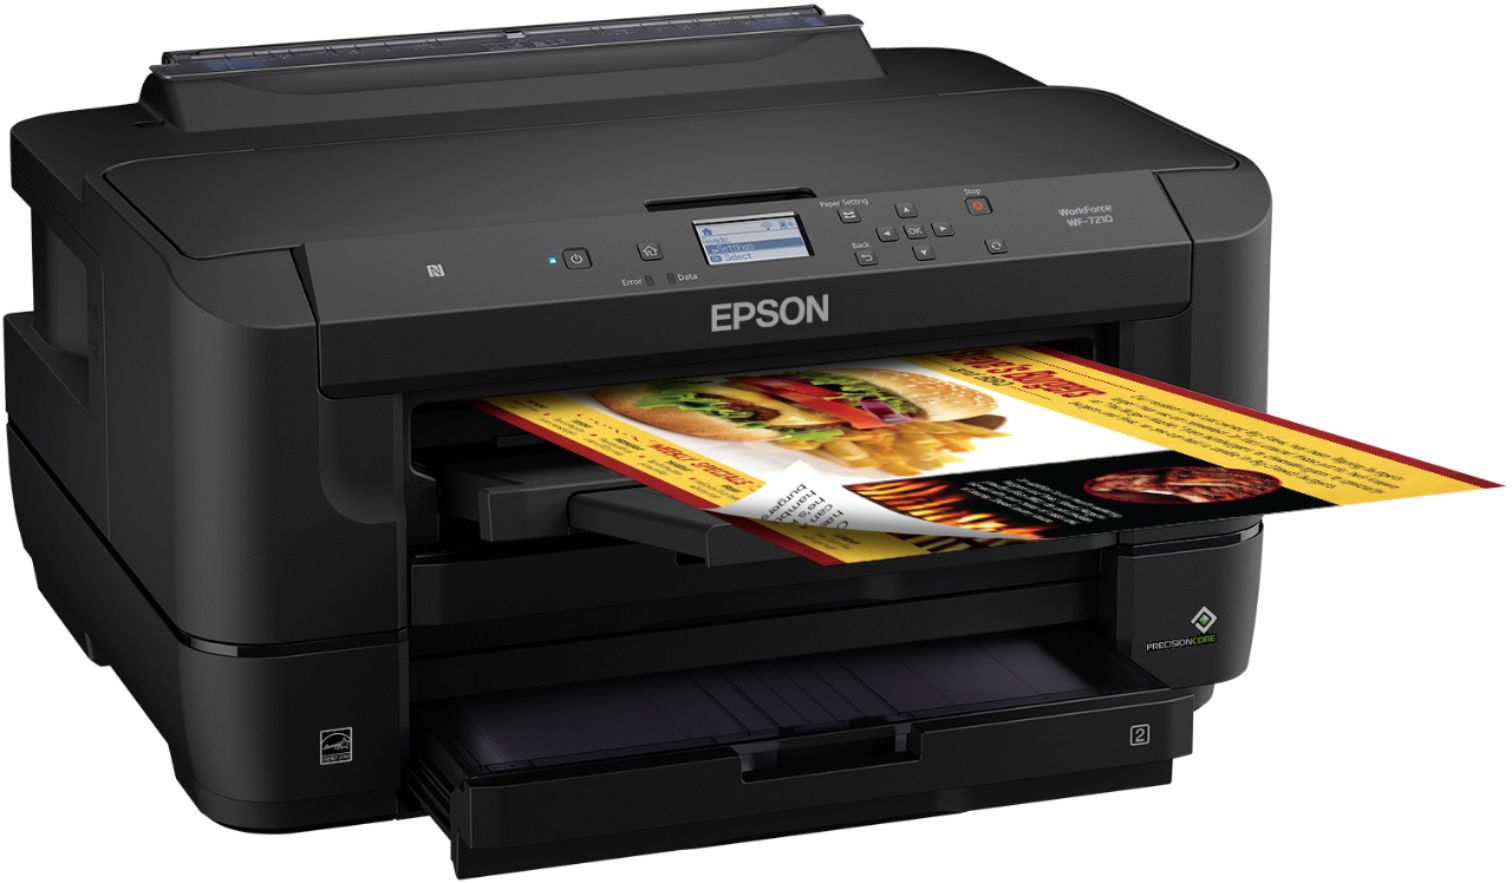 Angle View: Epson - WorkForce WF-7210 Wireless All-In-One Inkjet Printer - Black